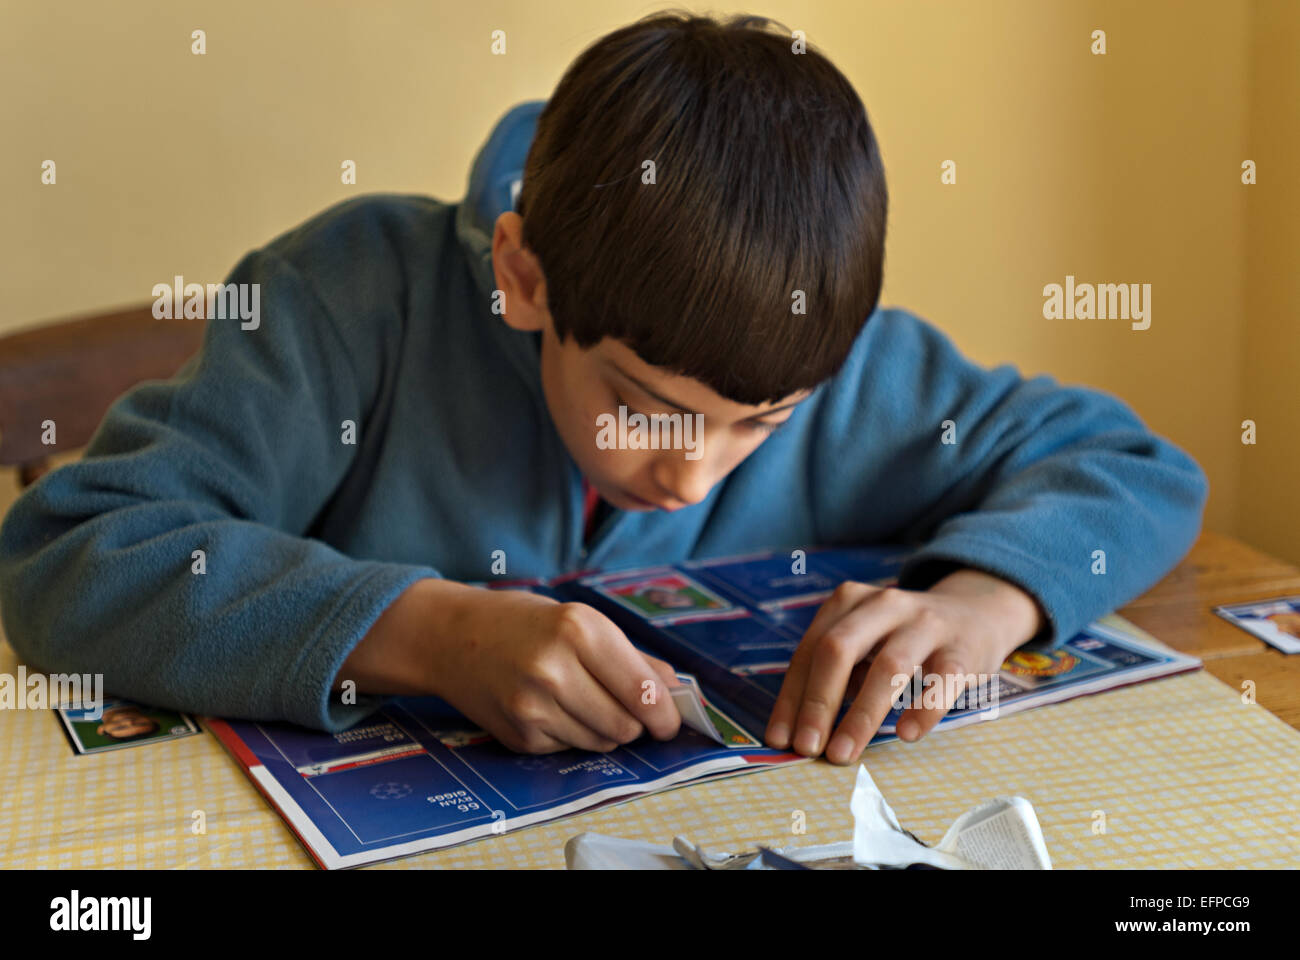 Intensive concentration and engagement with sticking football players into a hobby book by young child Stock Photo